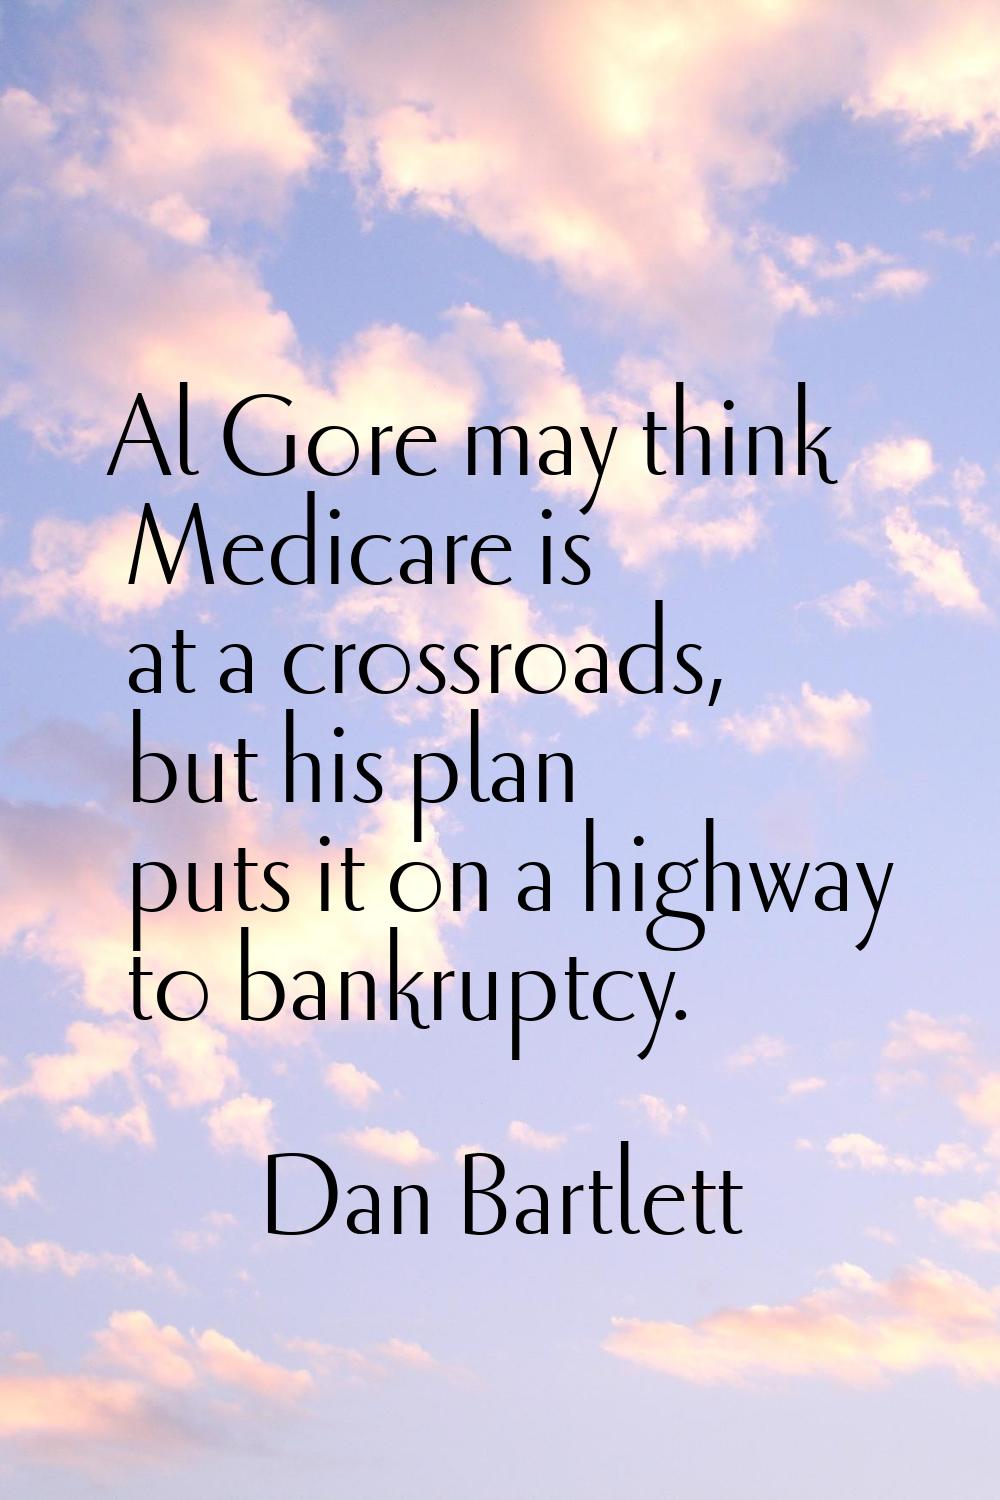 Al Gore may think Medicare is at a crossroads, but his plan puts it on a highway to bankruptcy.